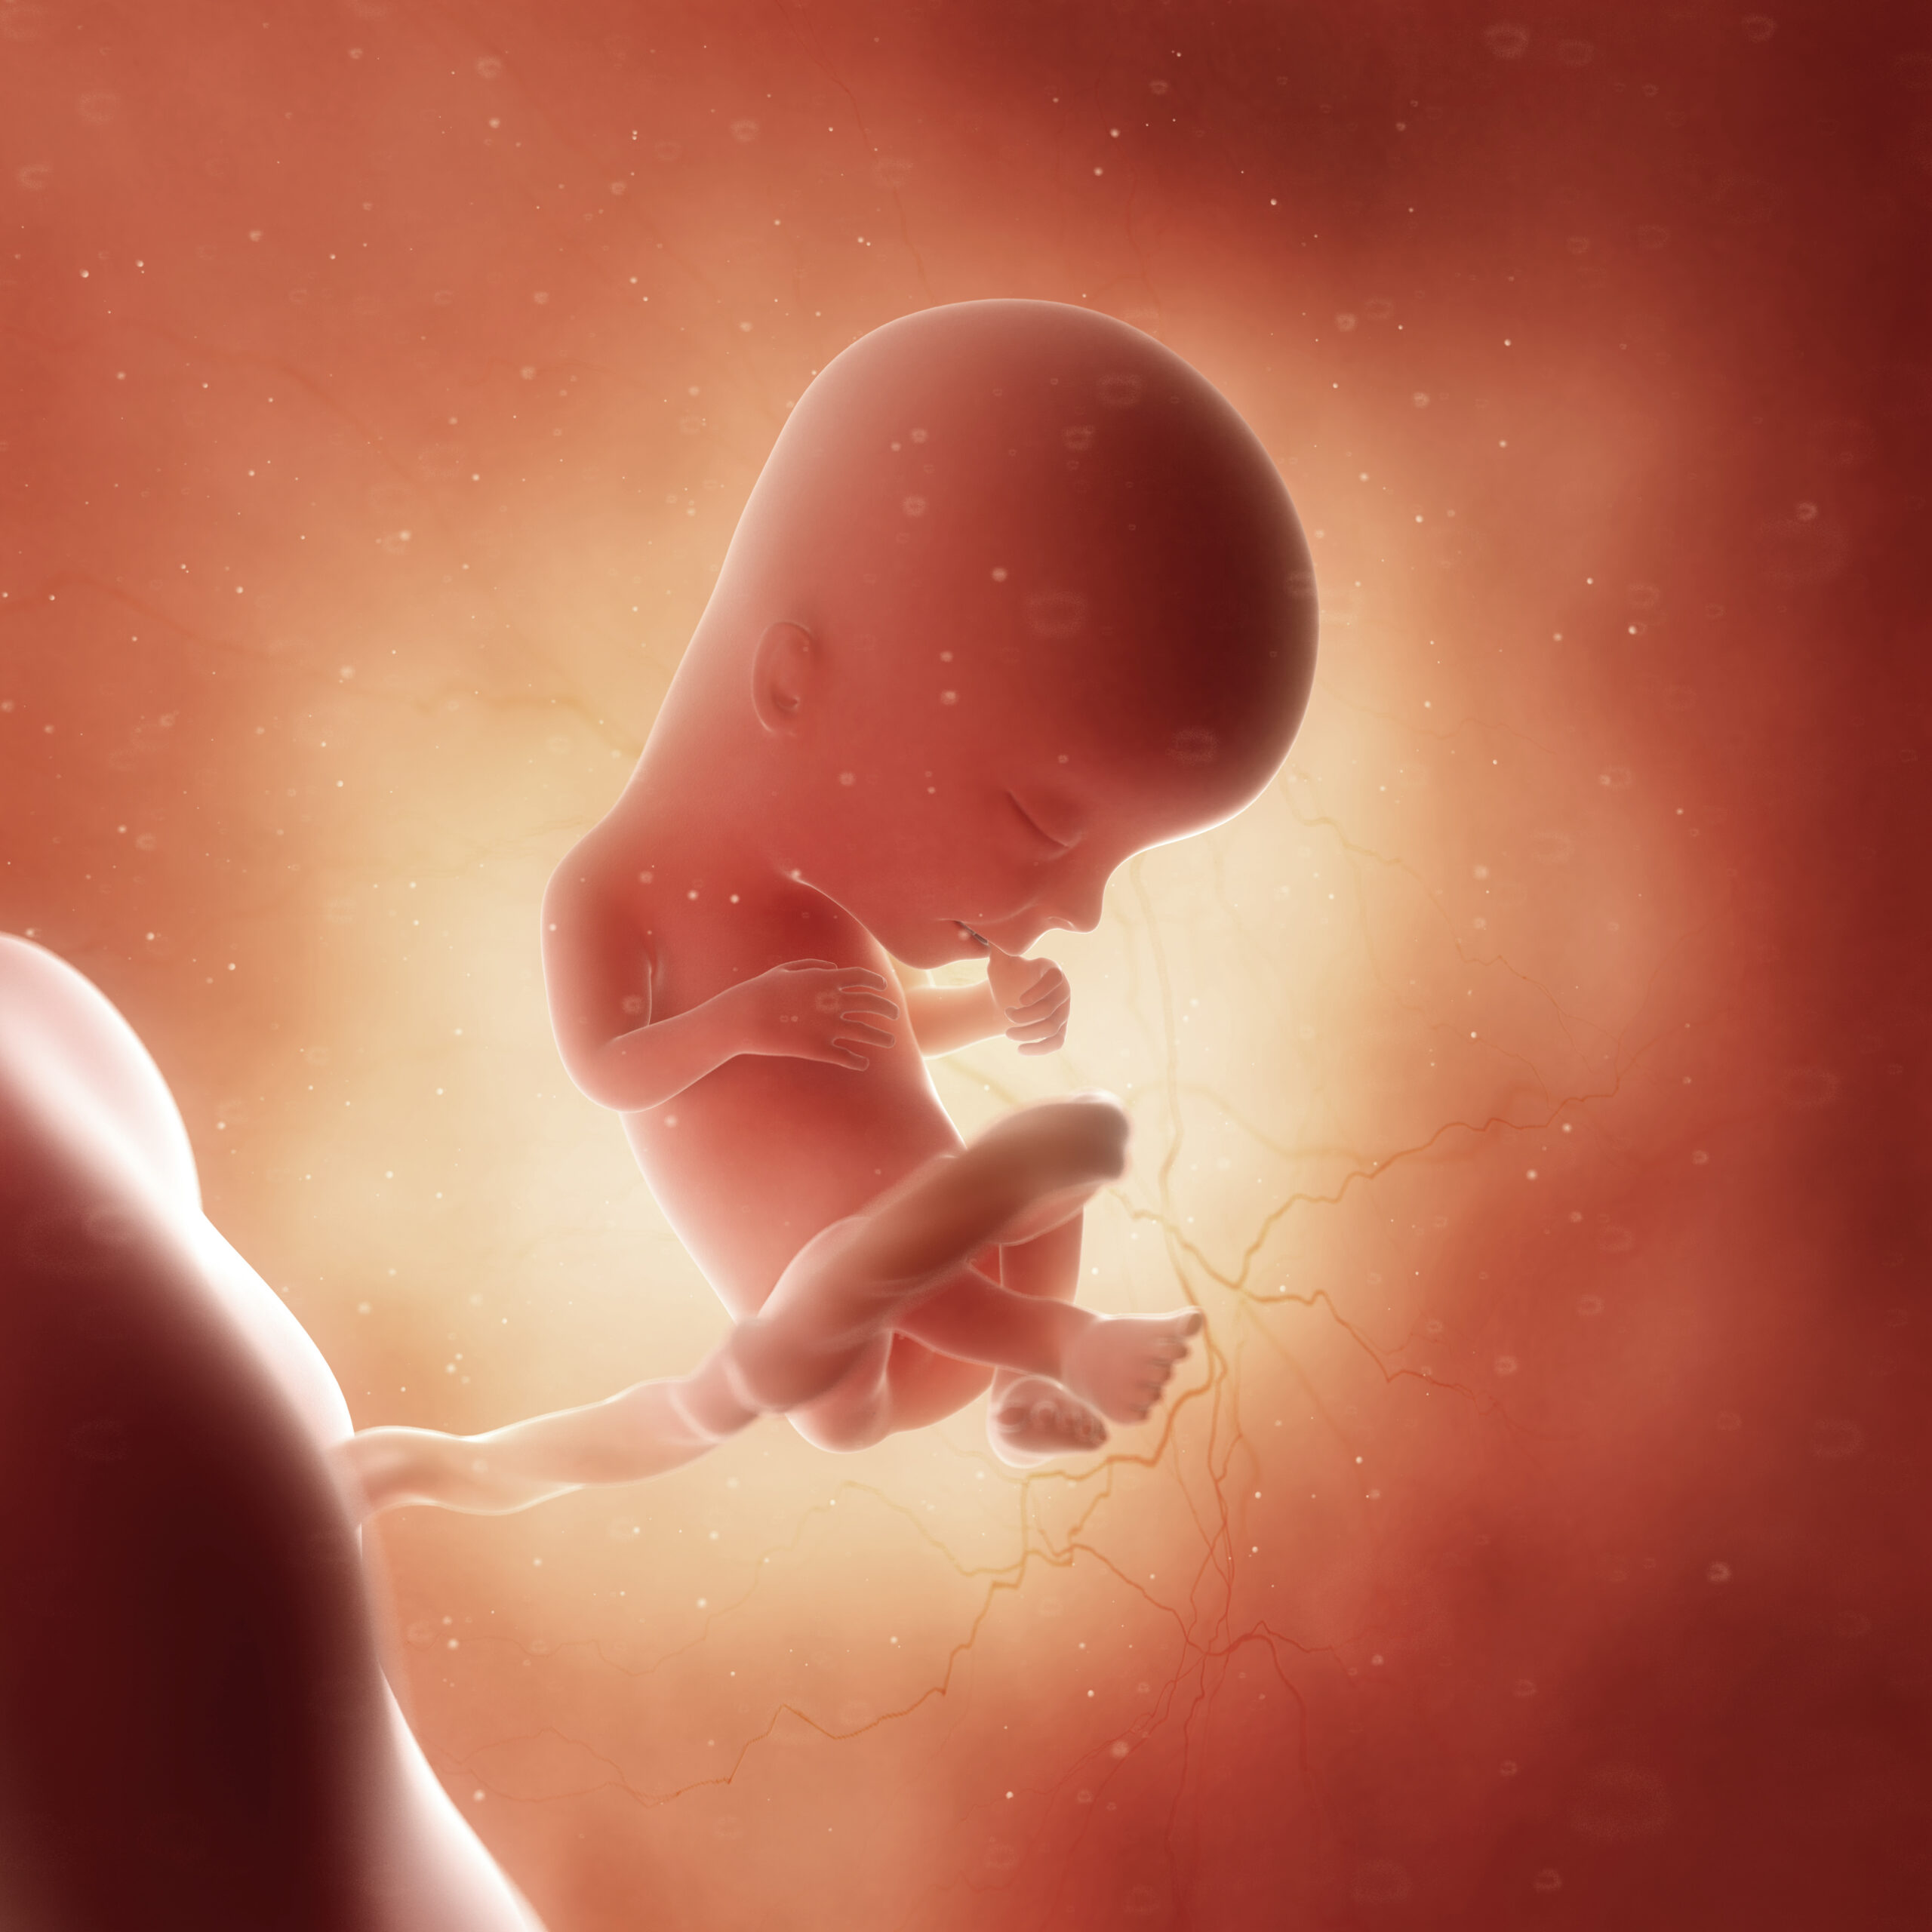 Baby in utero at 13 weeks